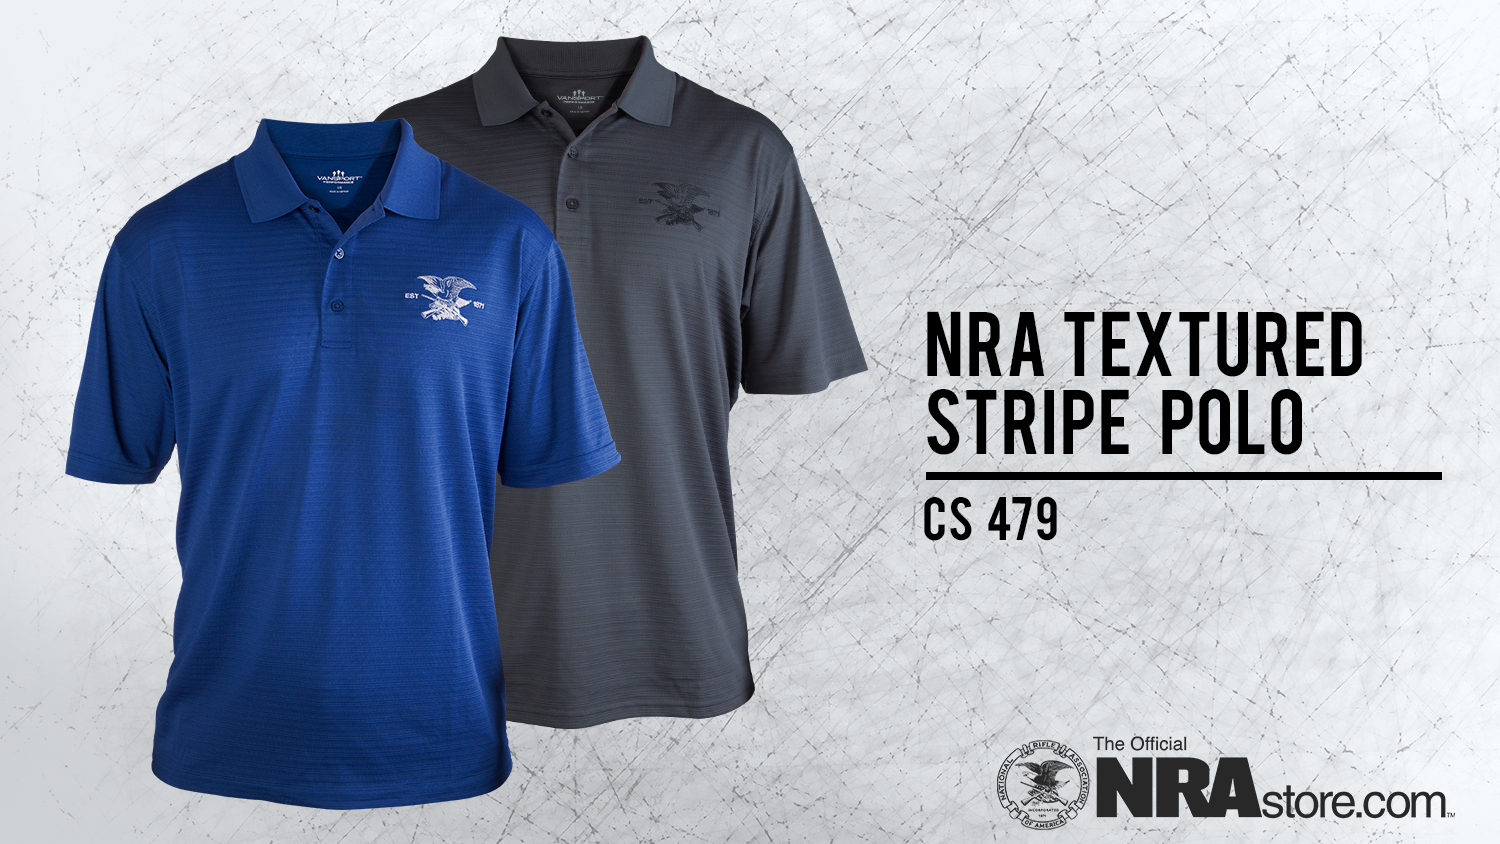 NRAstore Product Highlight: NRA Textured Stripe Polo